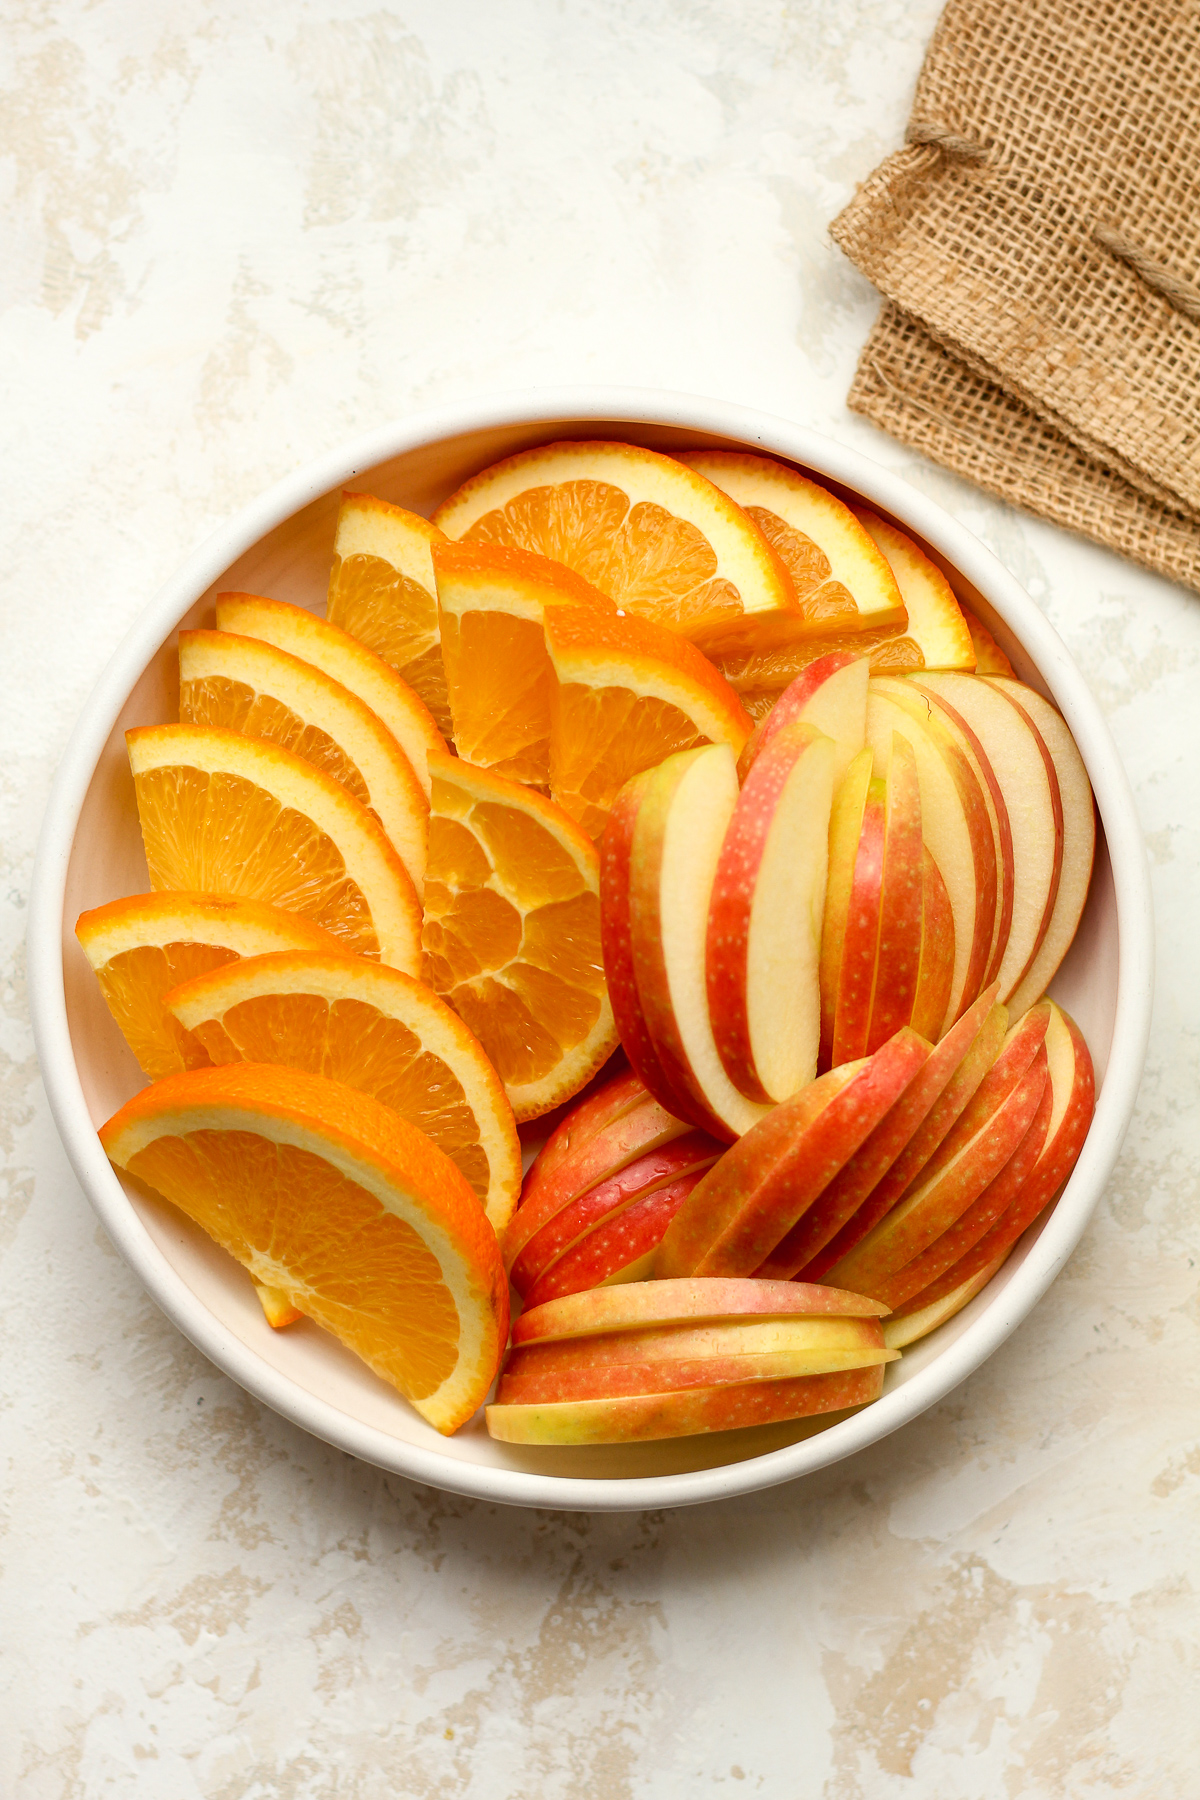 A plate of sliced oranges and apples.